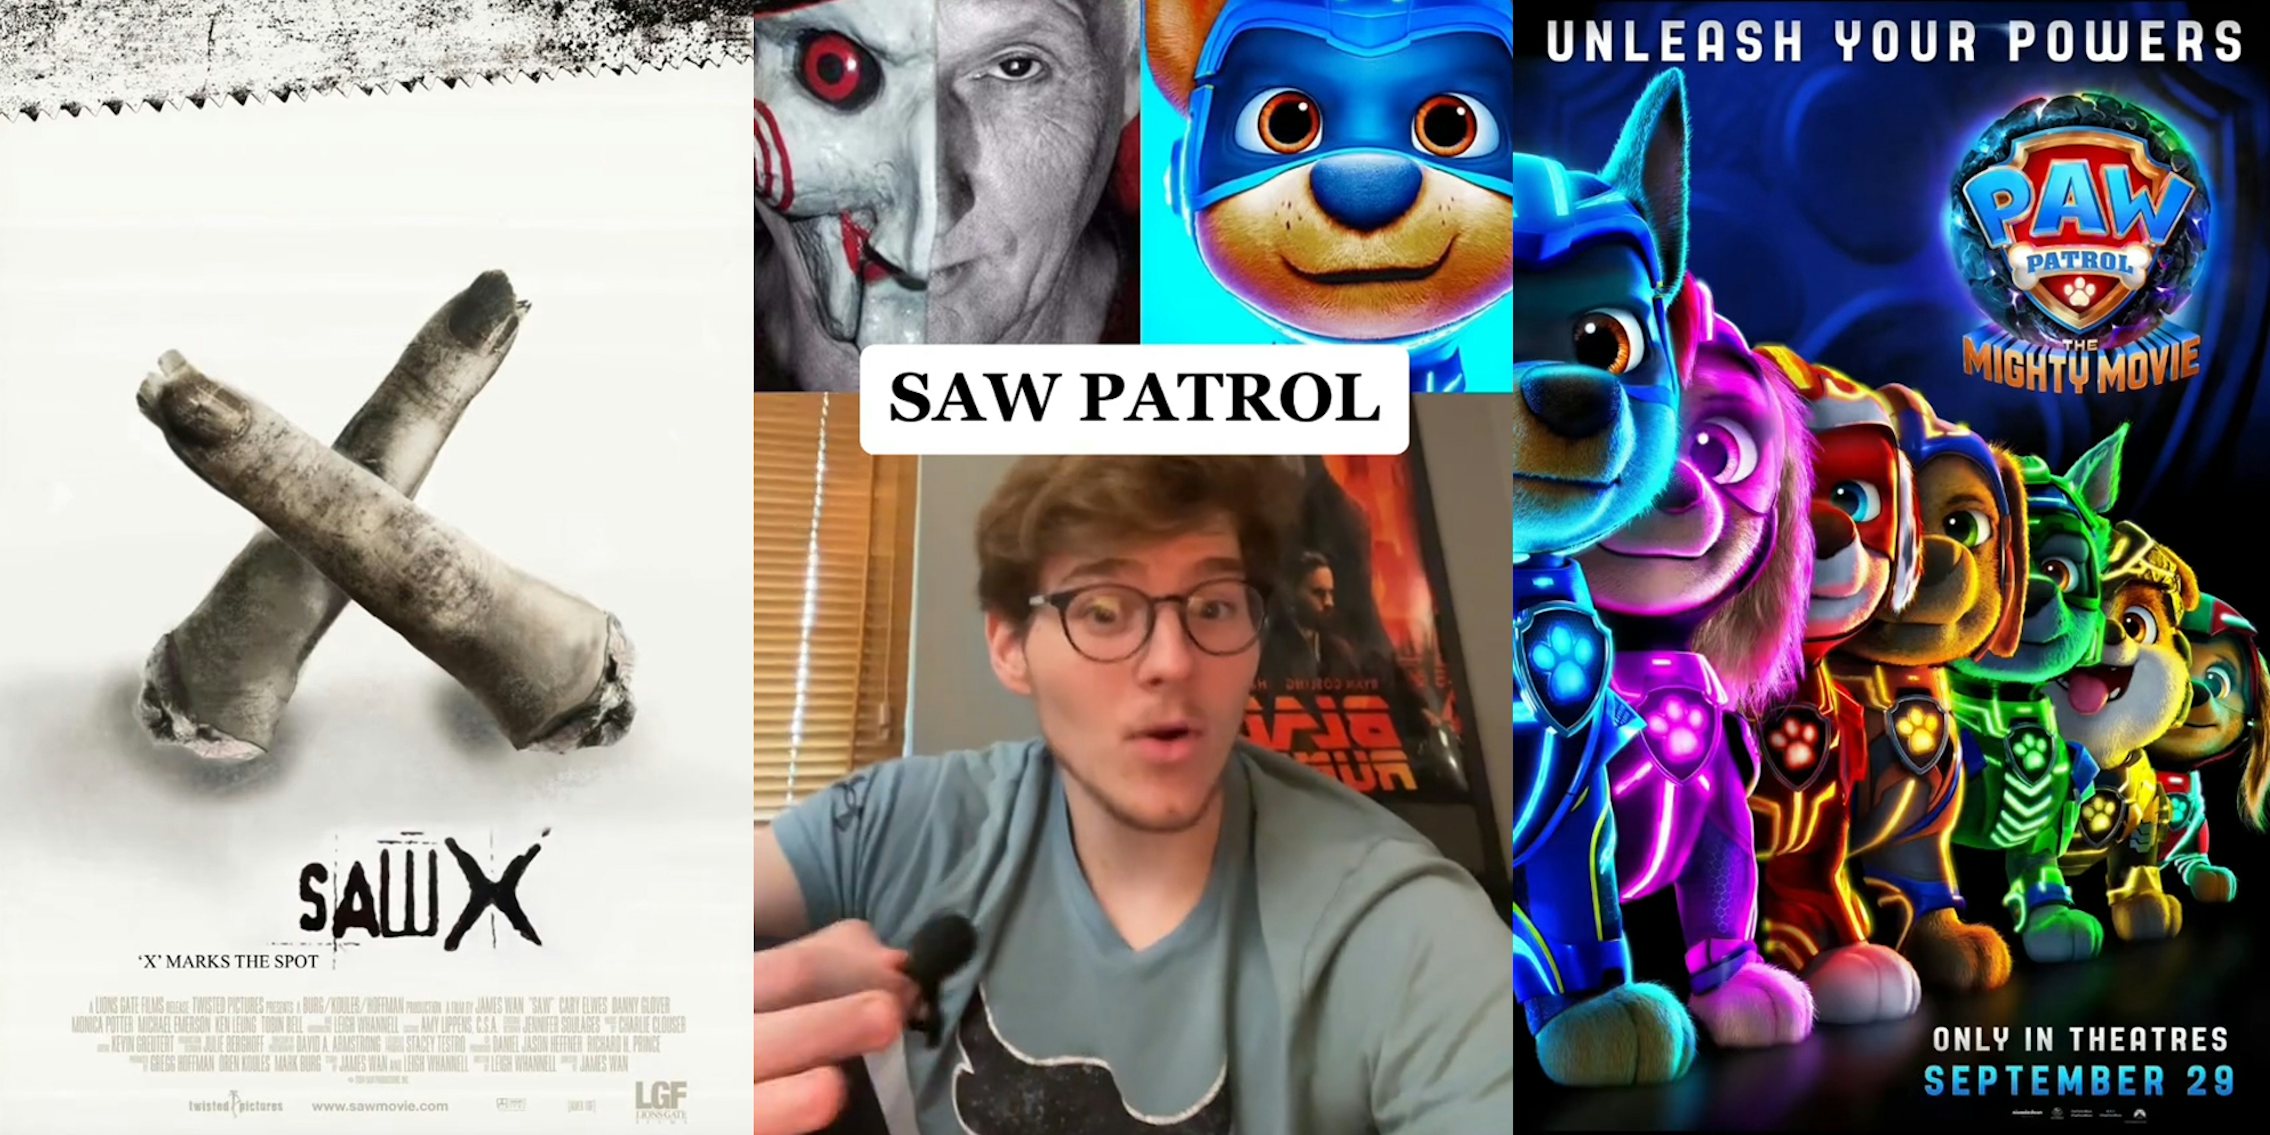 Saw X poster (l) TikToker speaking into mic with Saw and Paw Patrol images above with caption 'SAW PATROL' (c) Paw Patrol the Mighty Movie poster (r)